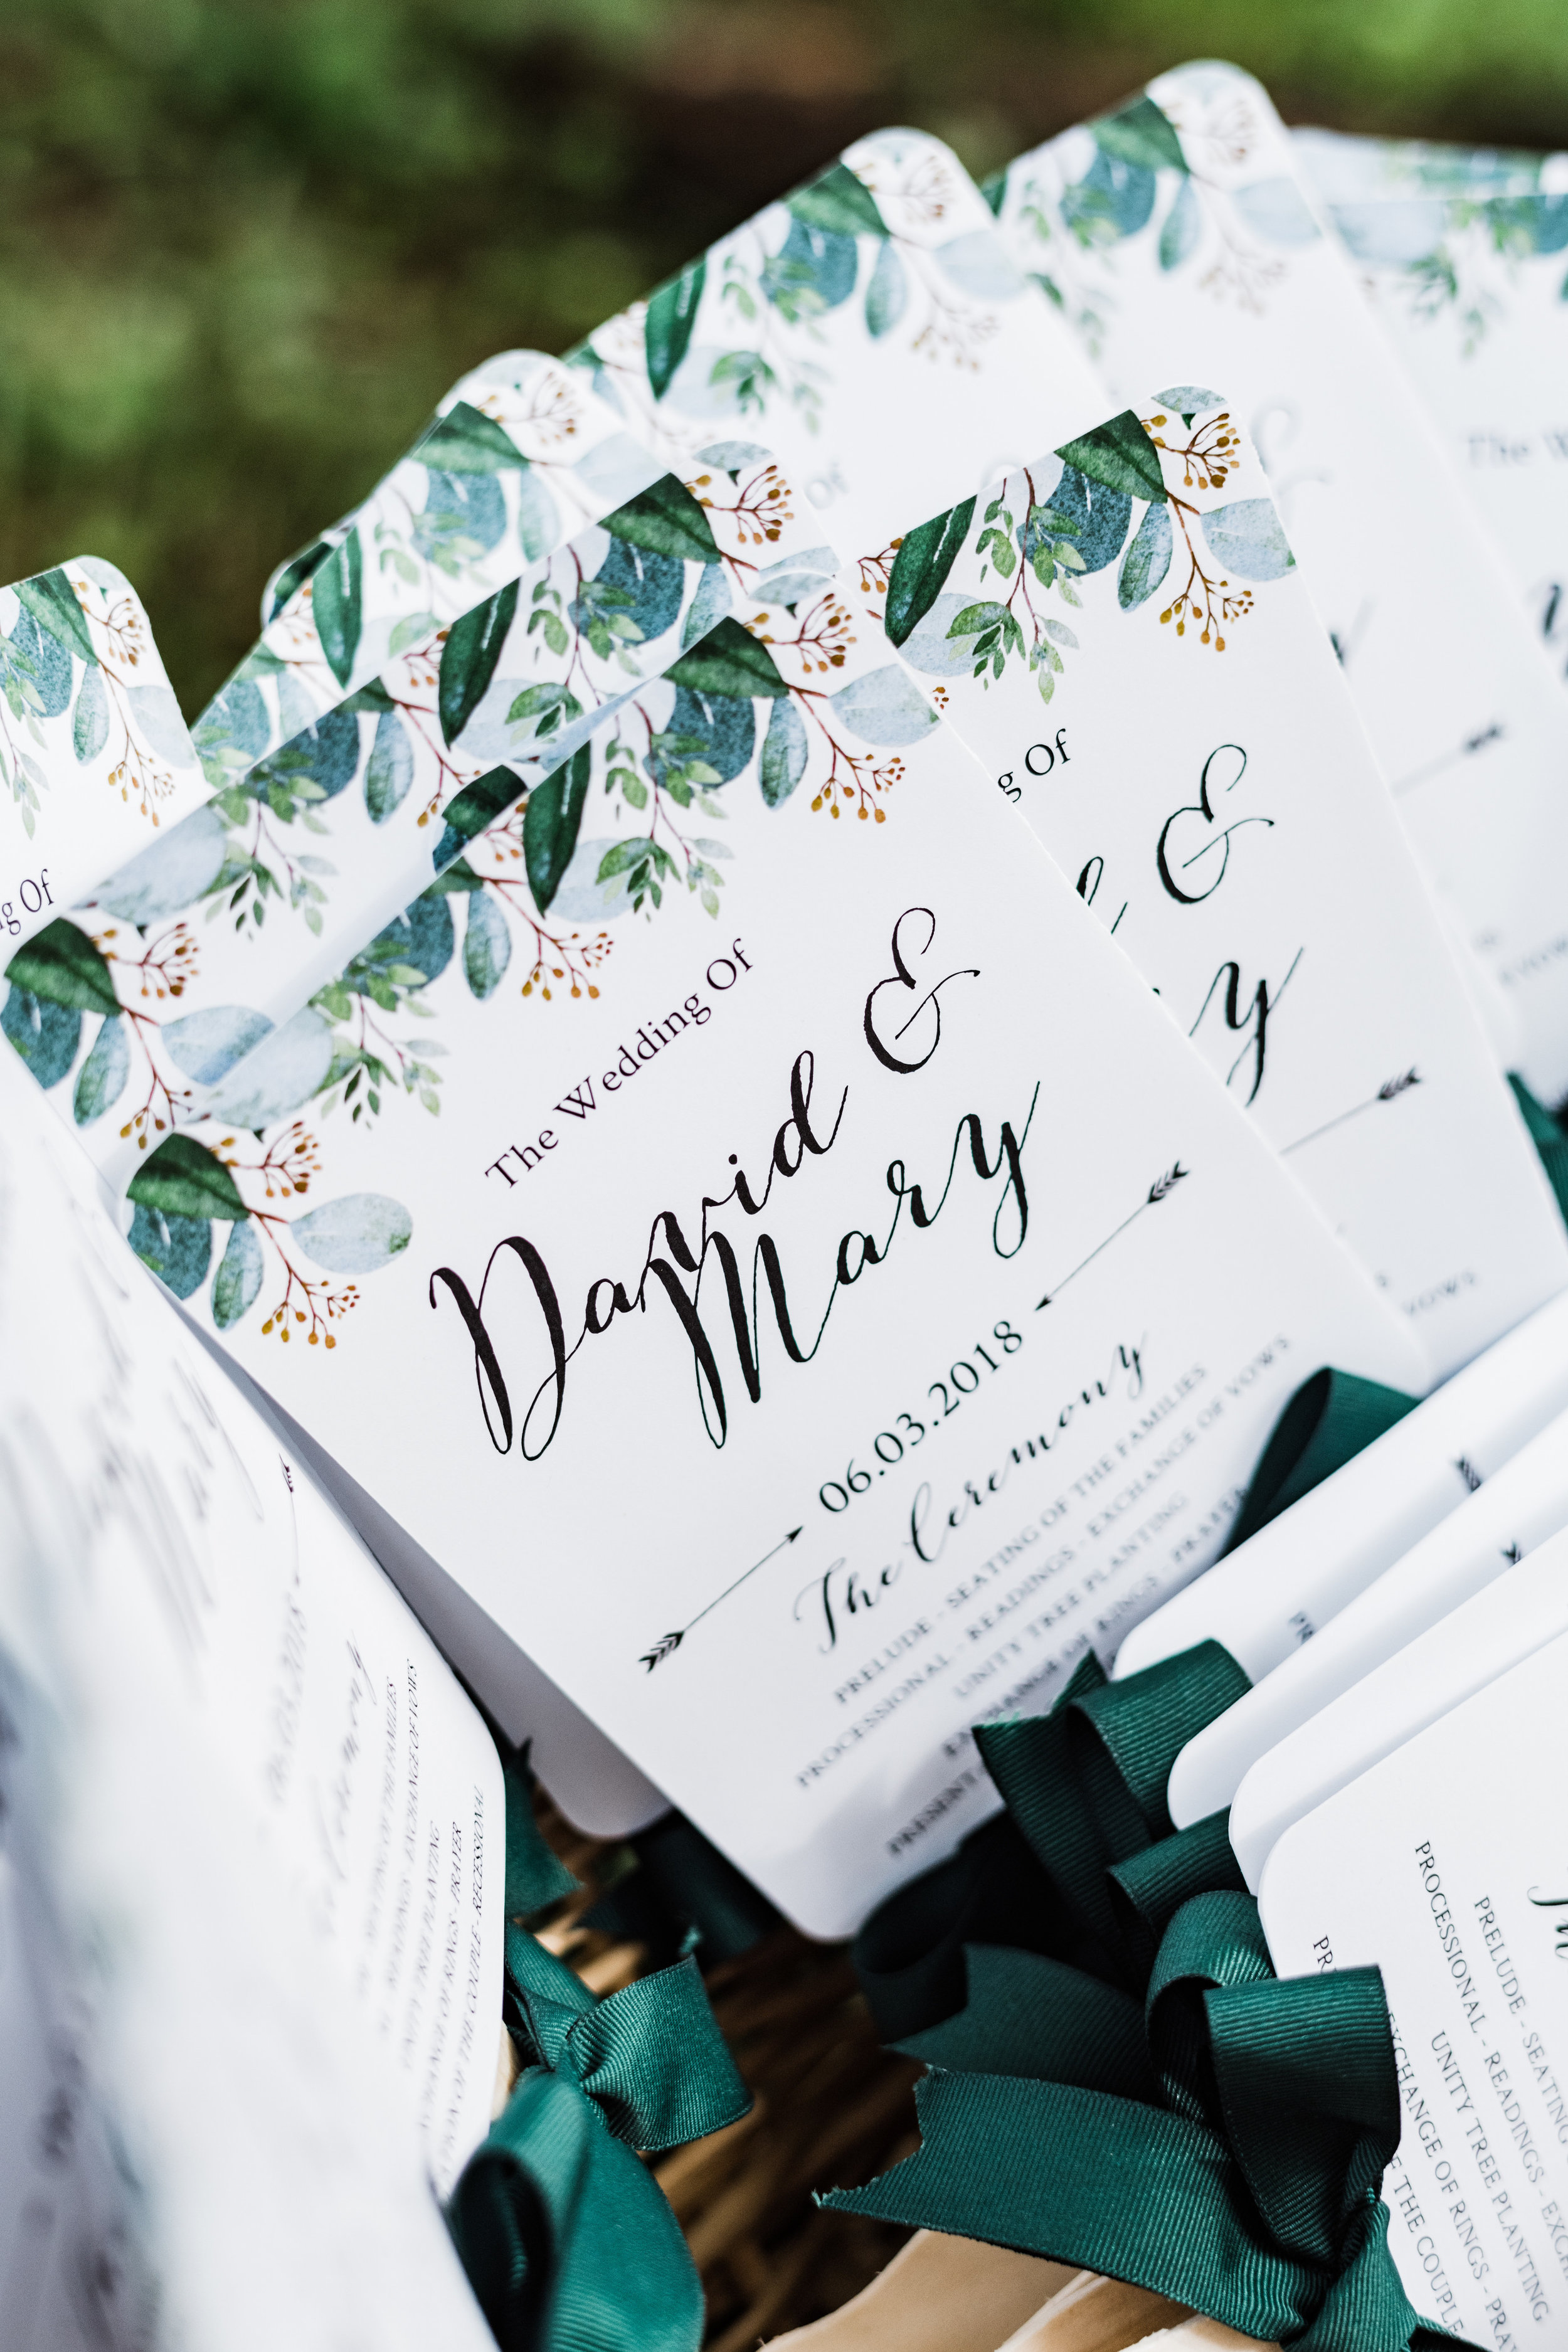 Classic Wedding - Green and White Wedding - Maryville, Tennessee Wedding - The Overwhelmed Bride Wedding Blog